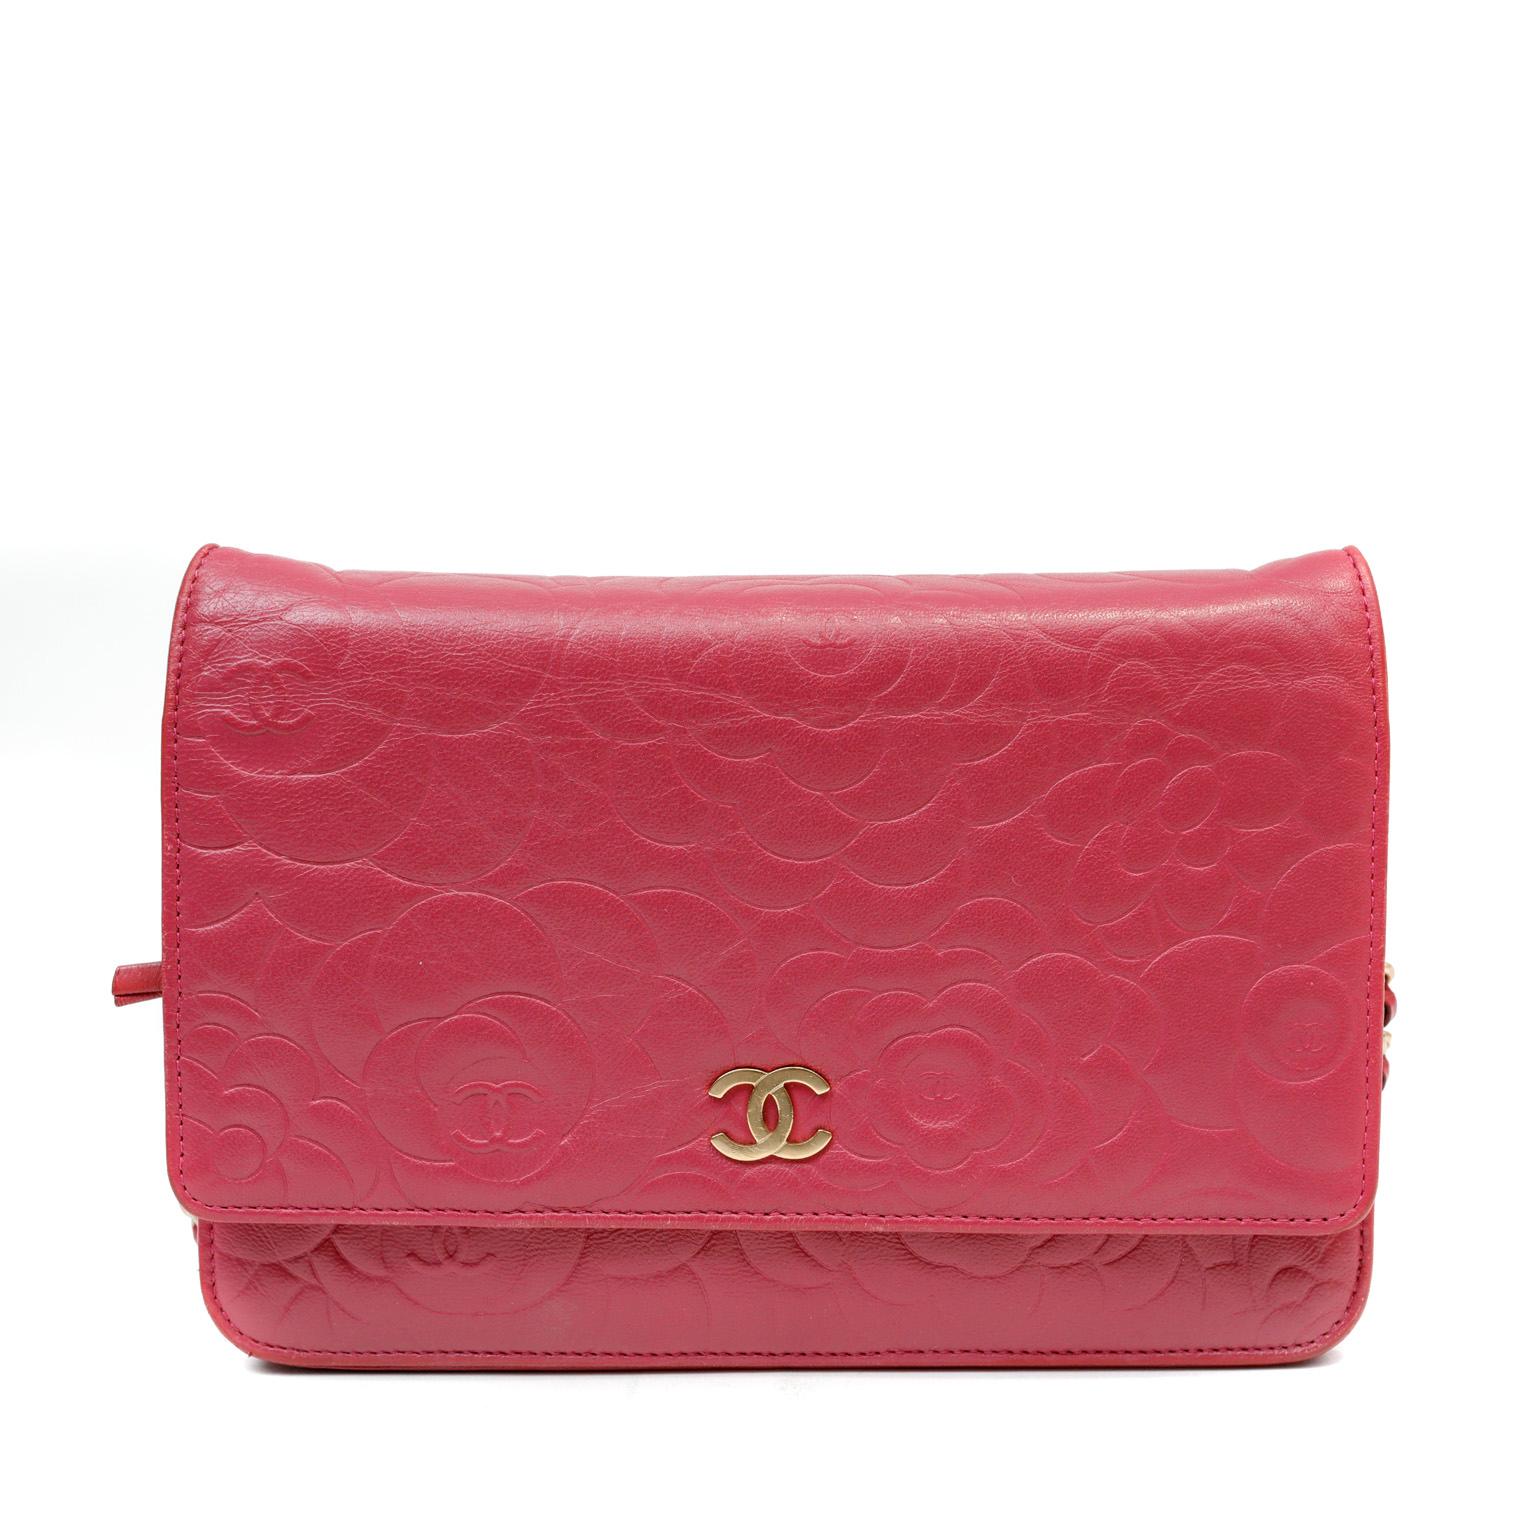 This authentic Chanel Rose Pink Camellia Embossed Leather Wallet on a Chain is in excellent plus condition.  The beloved WOC, or Wallet on a Chain, is a classic style that elevates any ensemble while practically carrying all the essentials. Rose